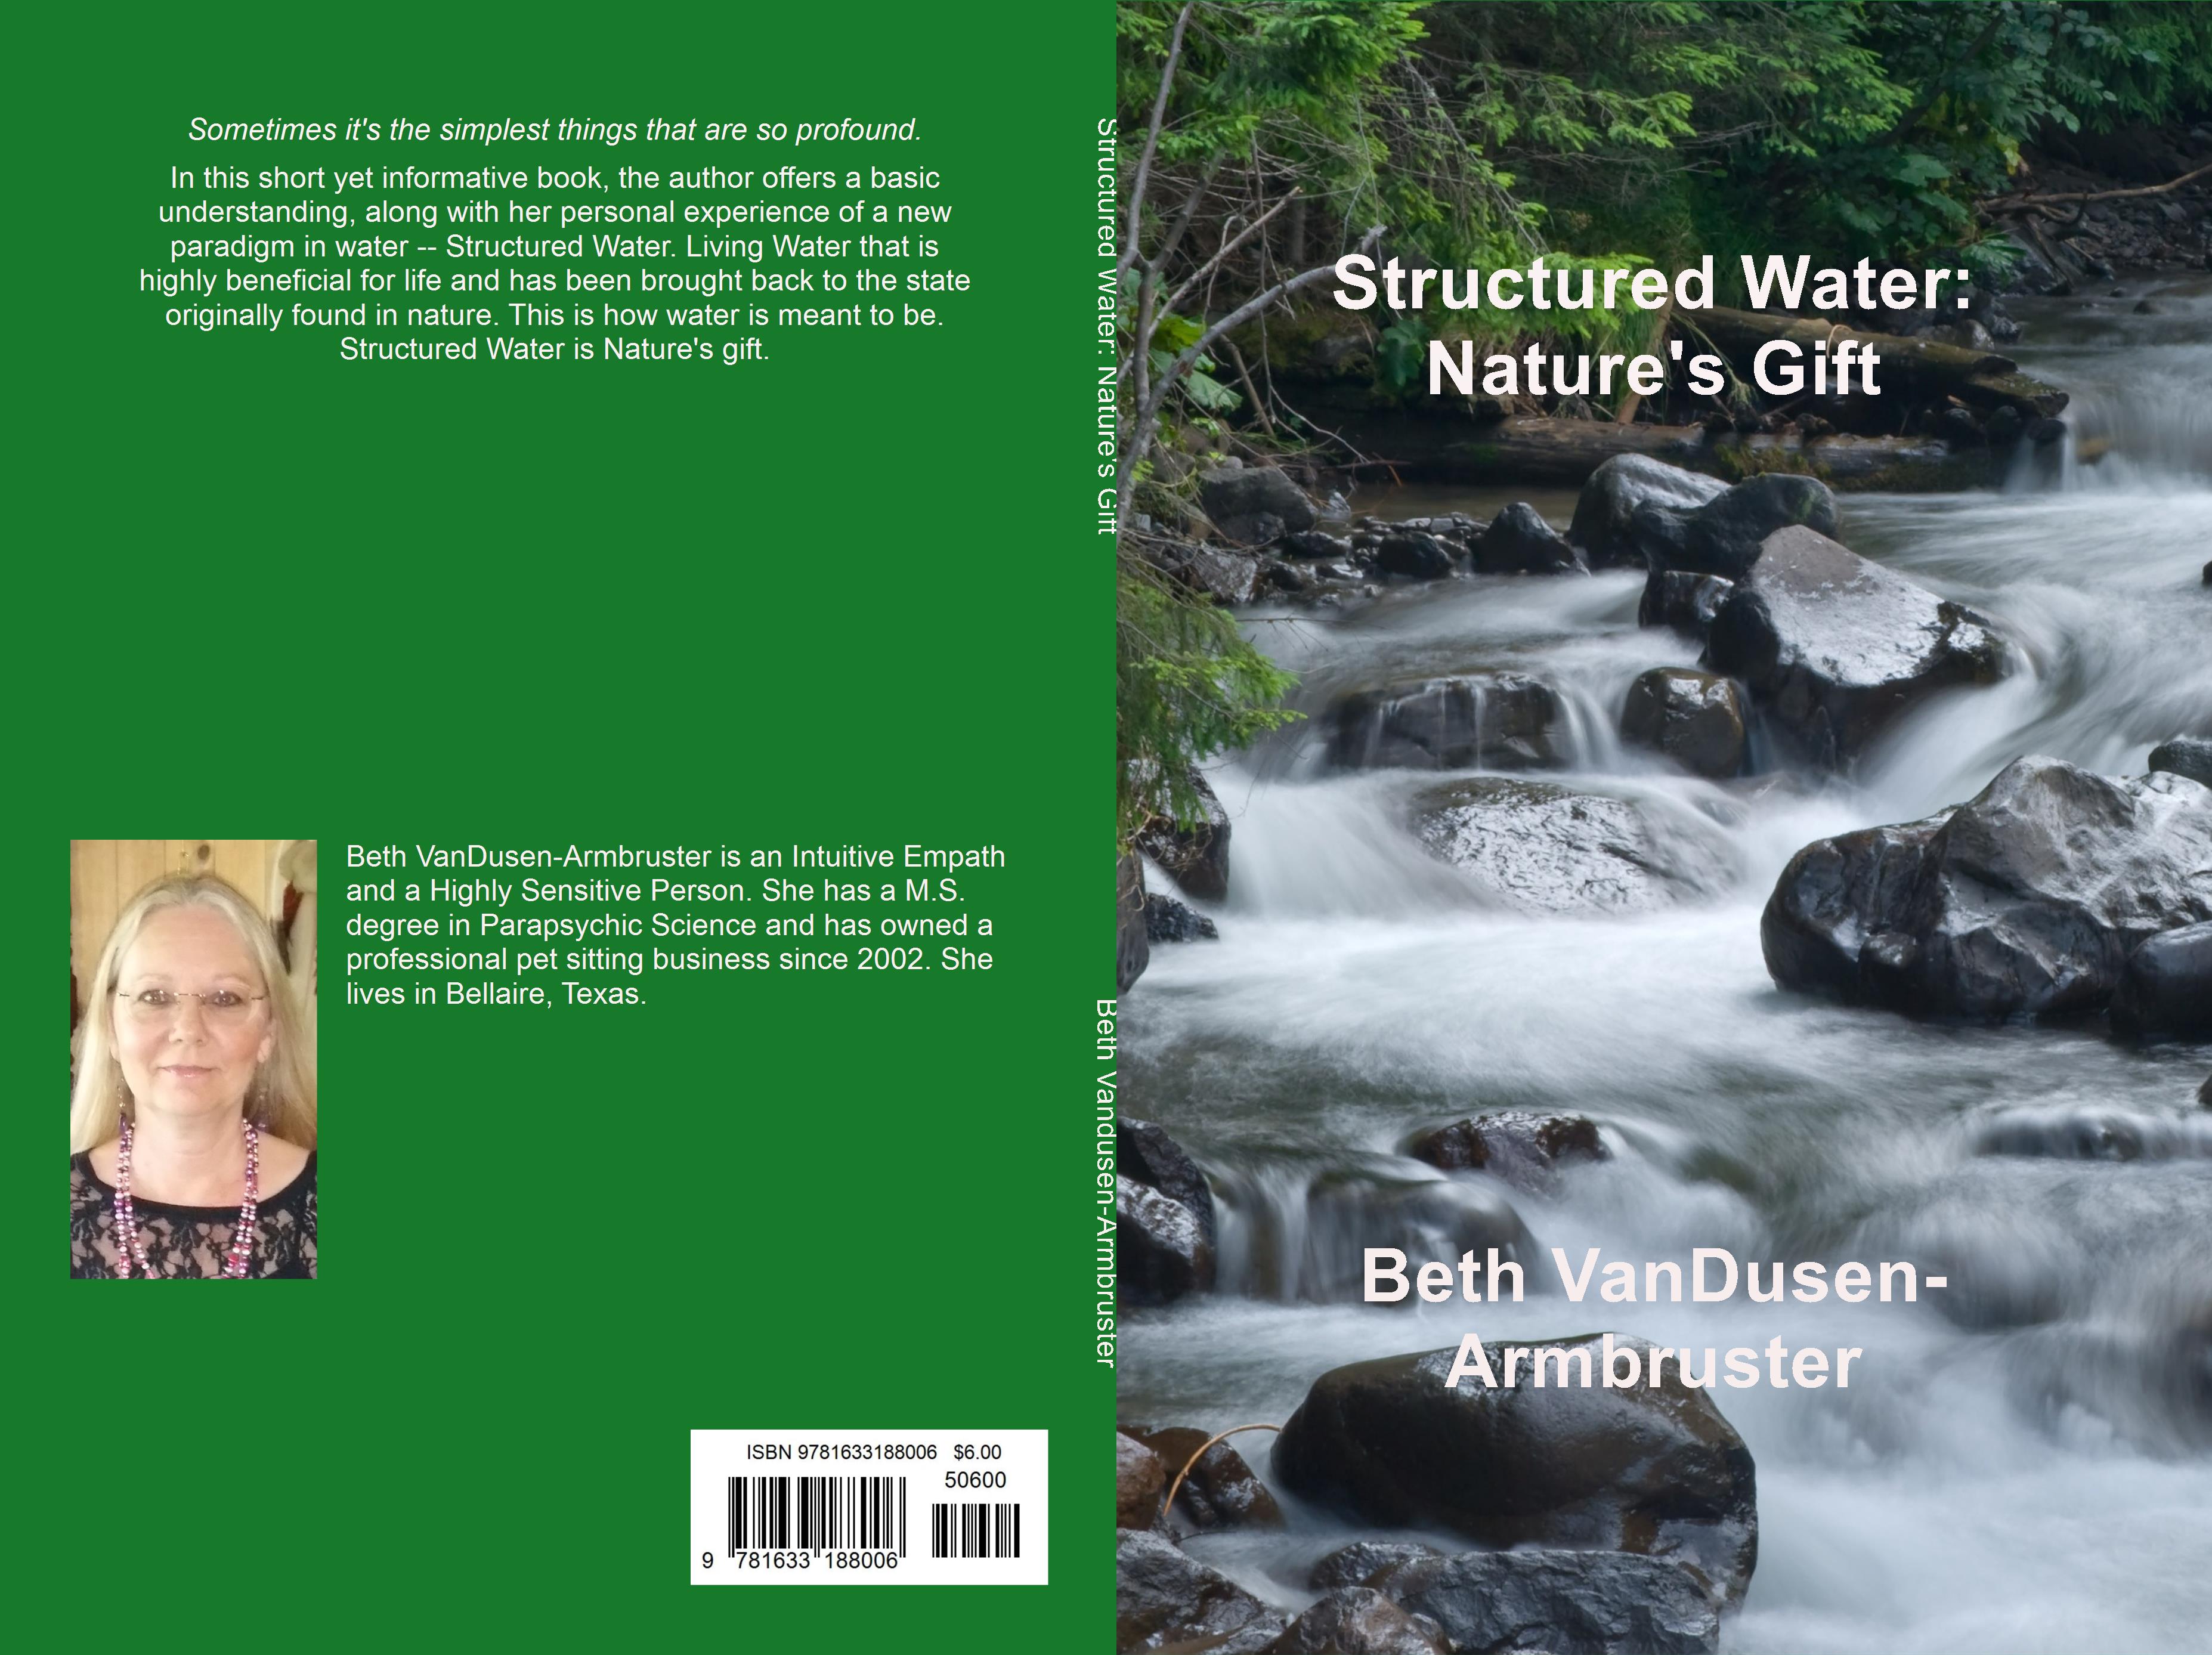 Structured Water: Nature